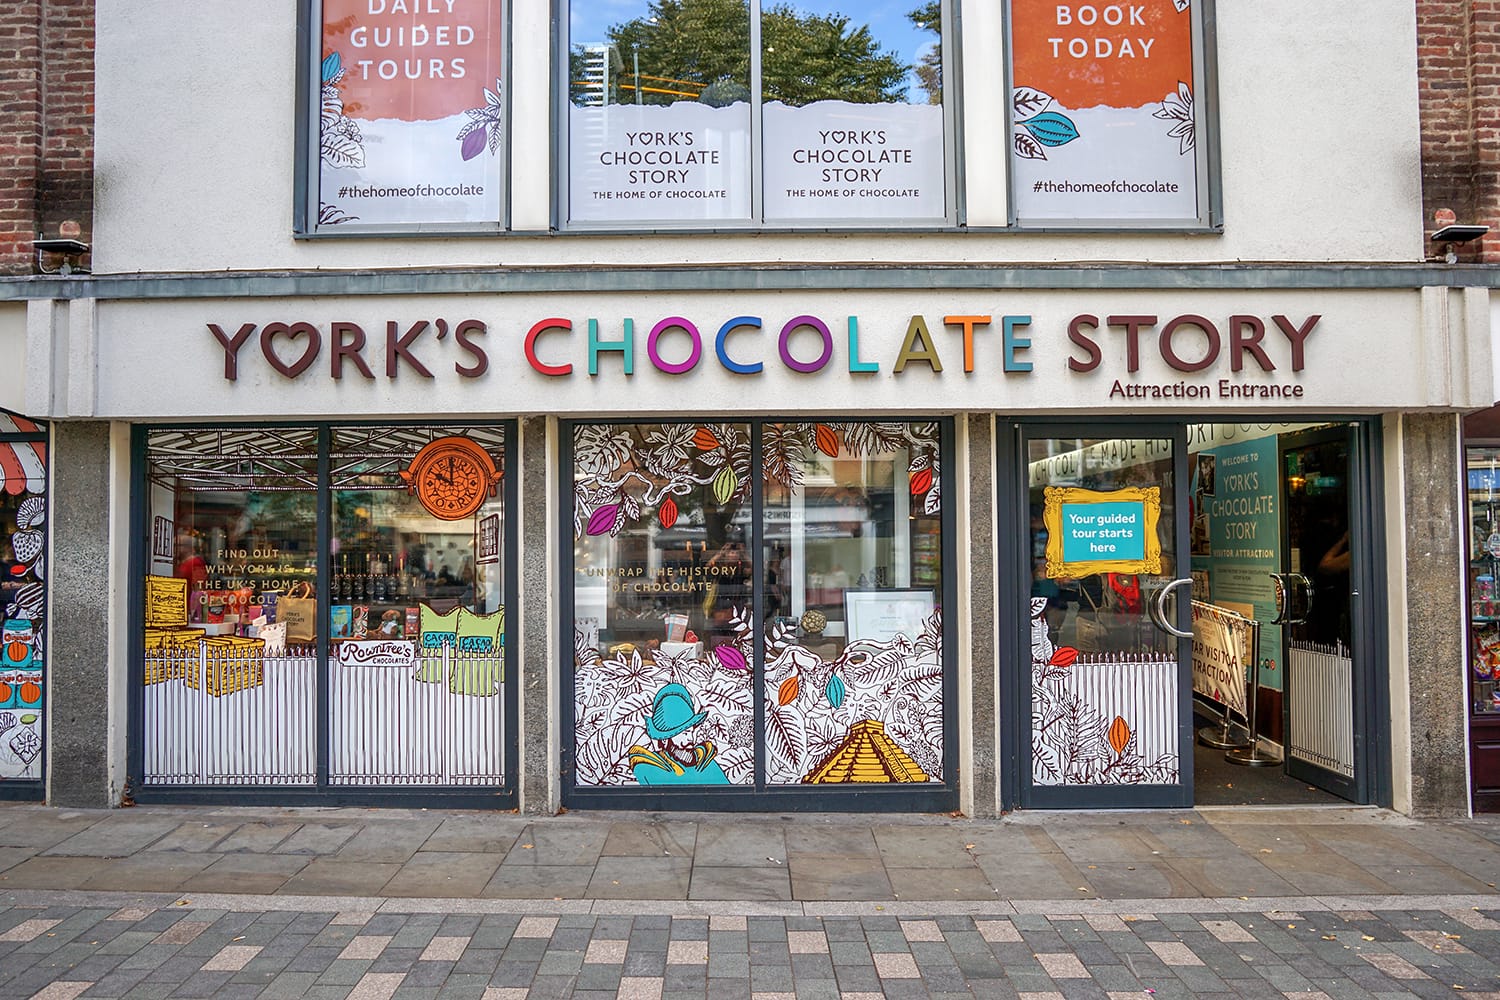 York's Chocolate Story attraction, Kings Square, Yorkshire, UK